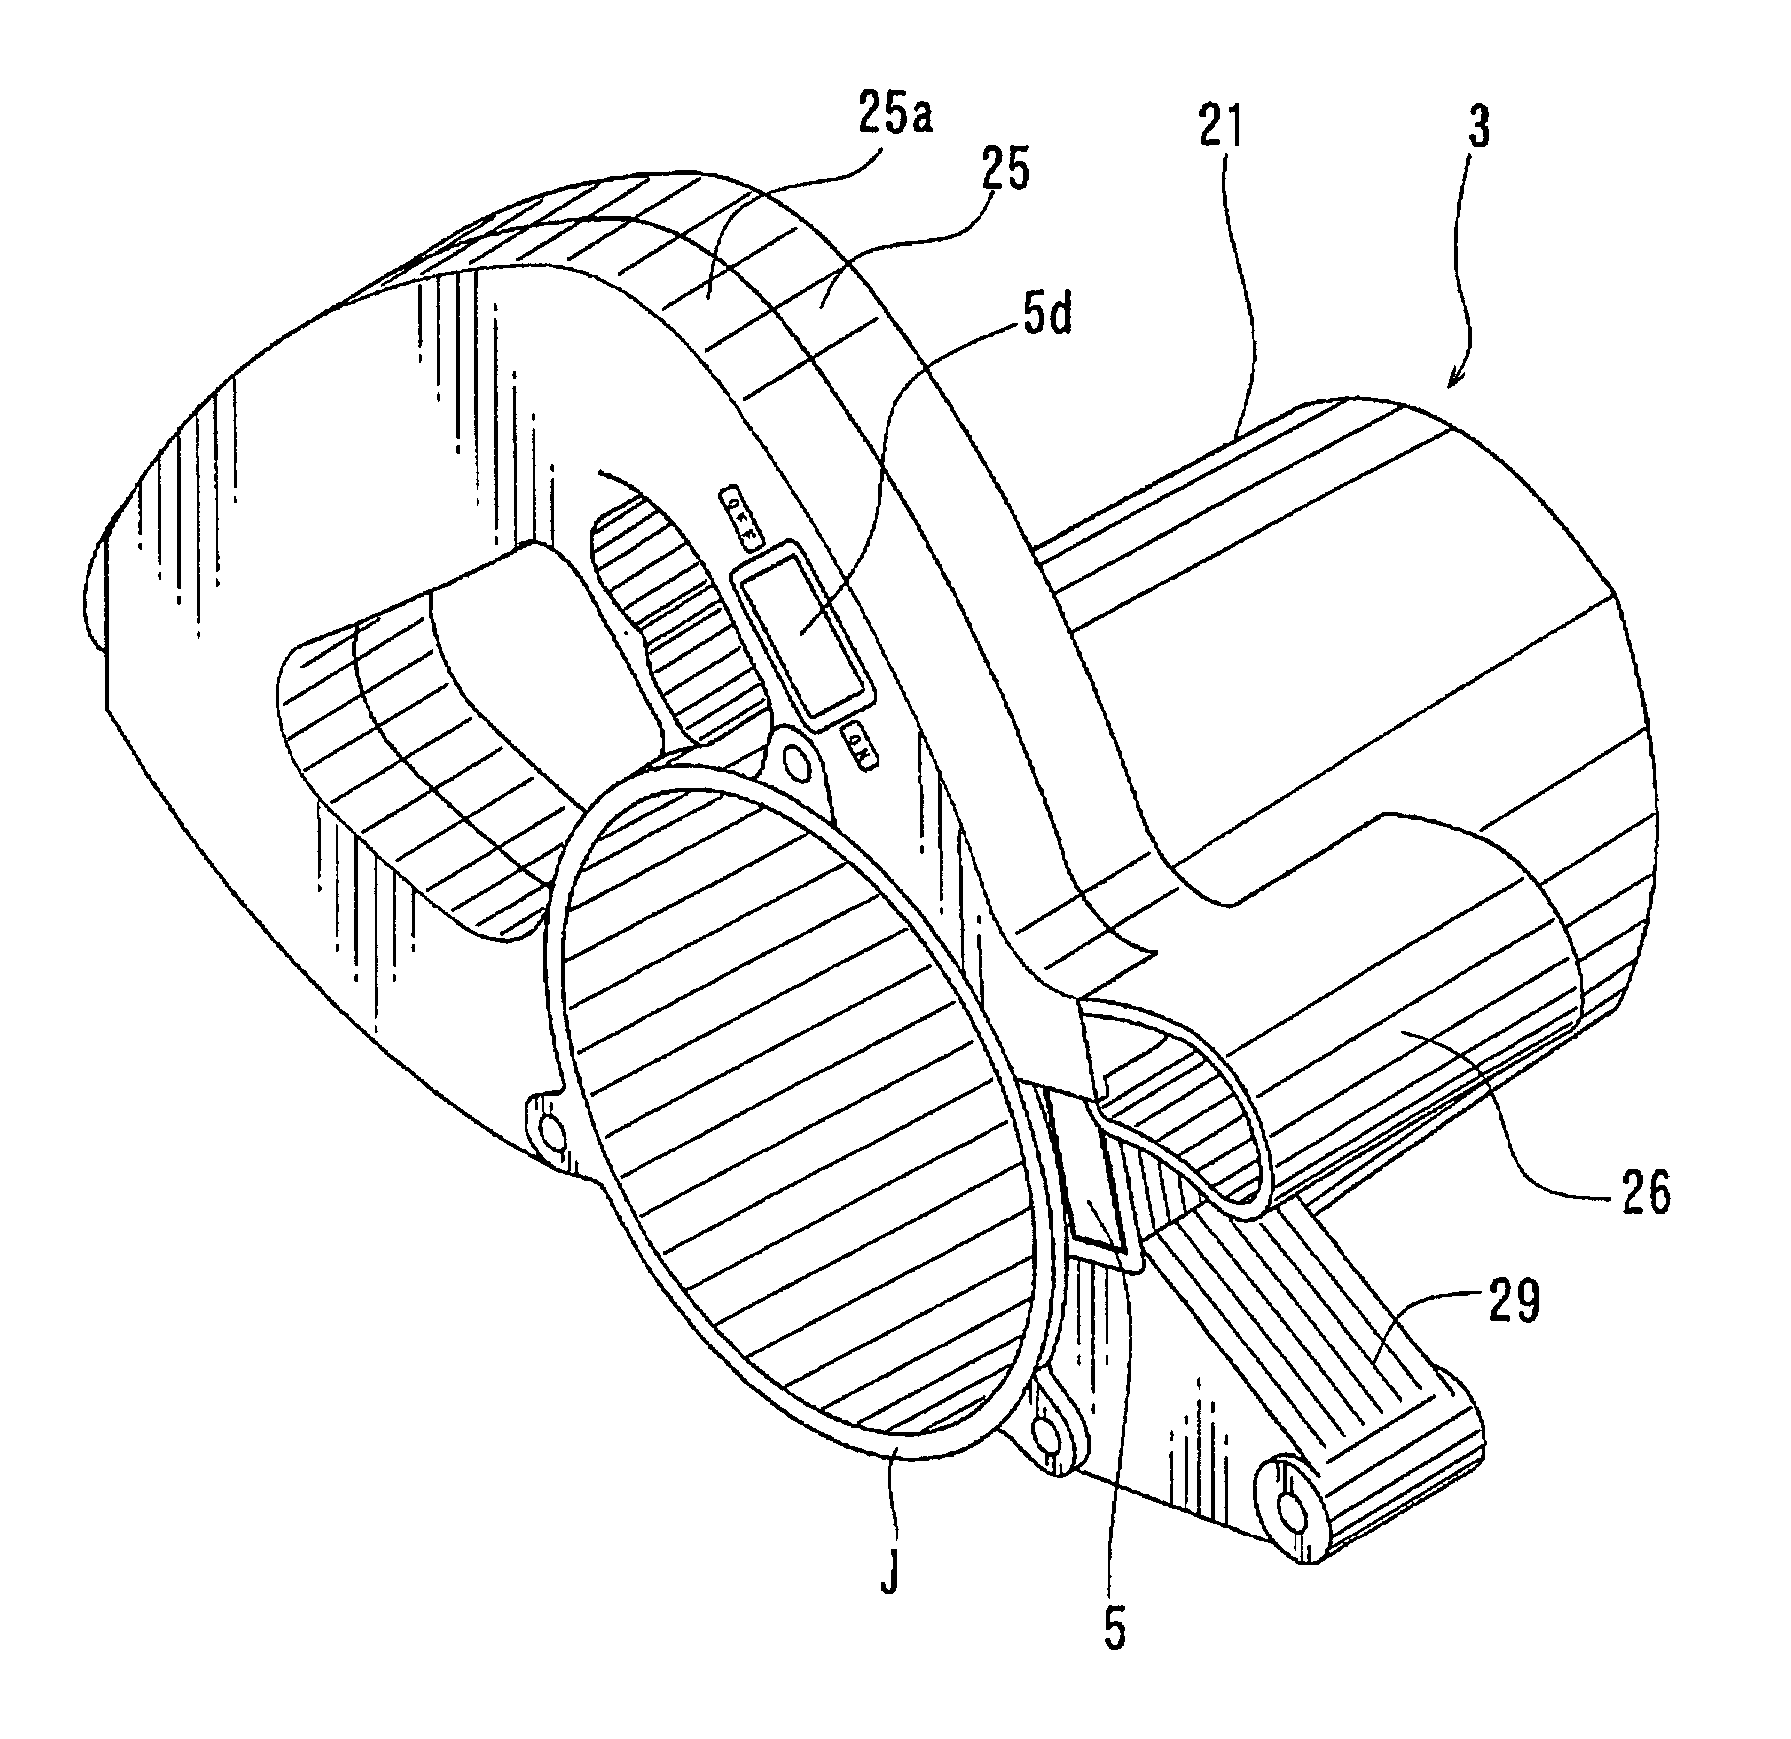 Cutting tools having lighting devices